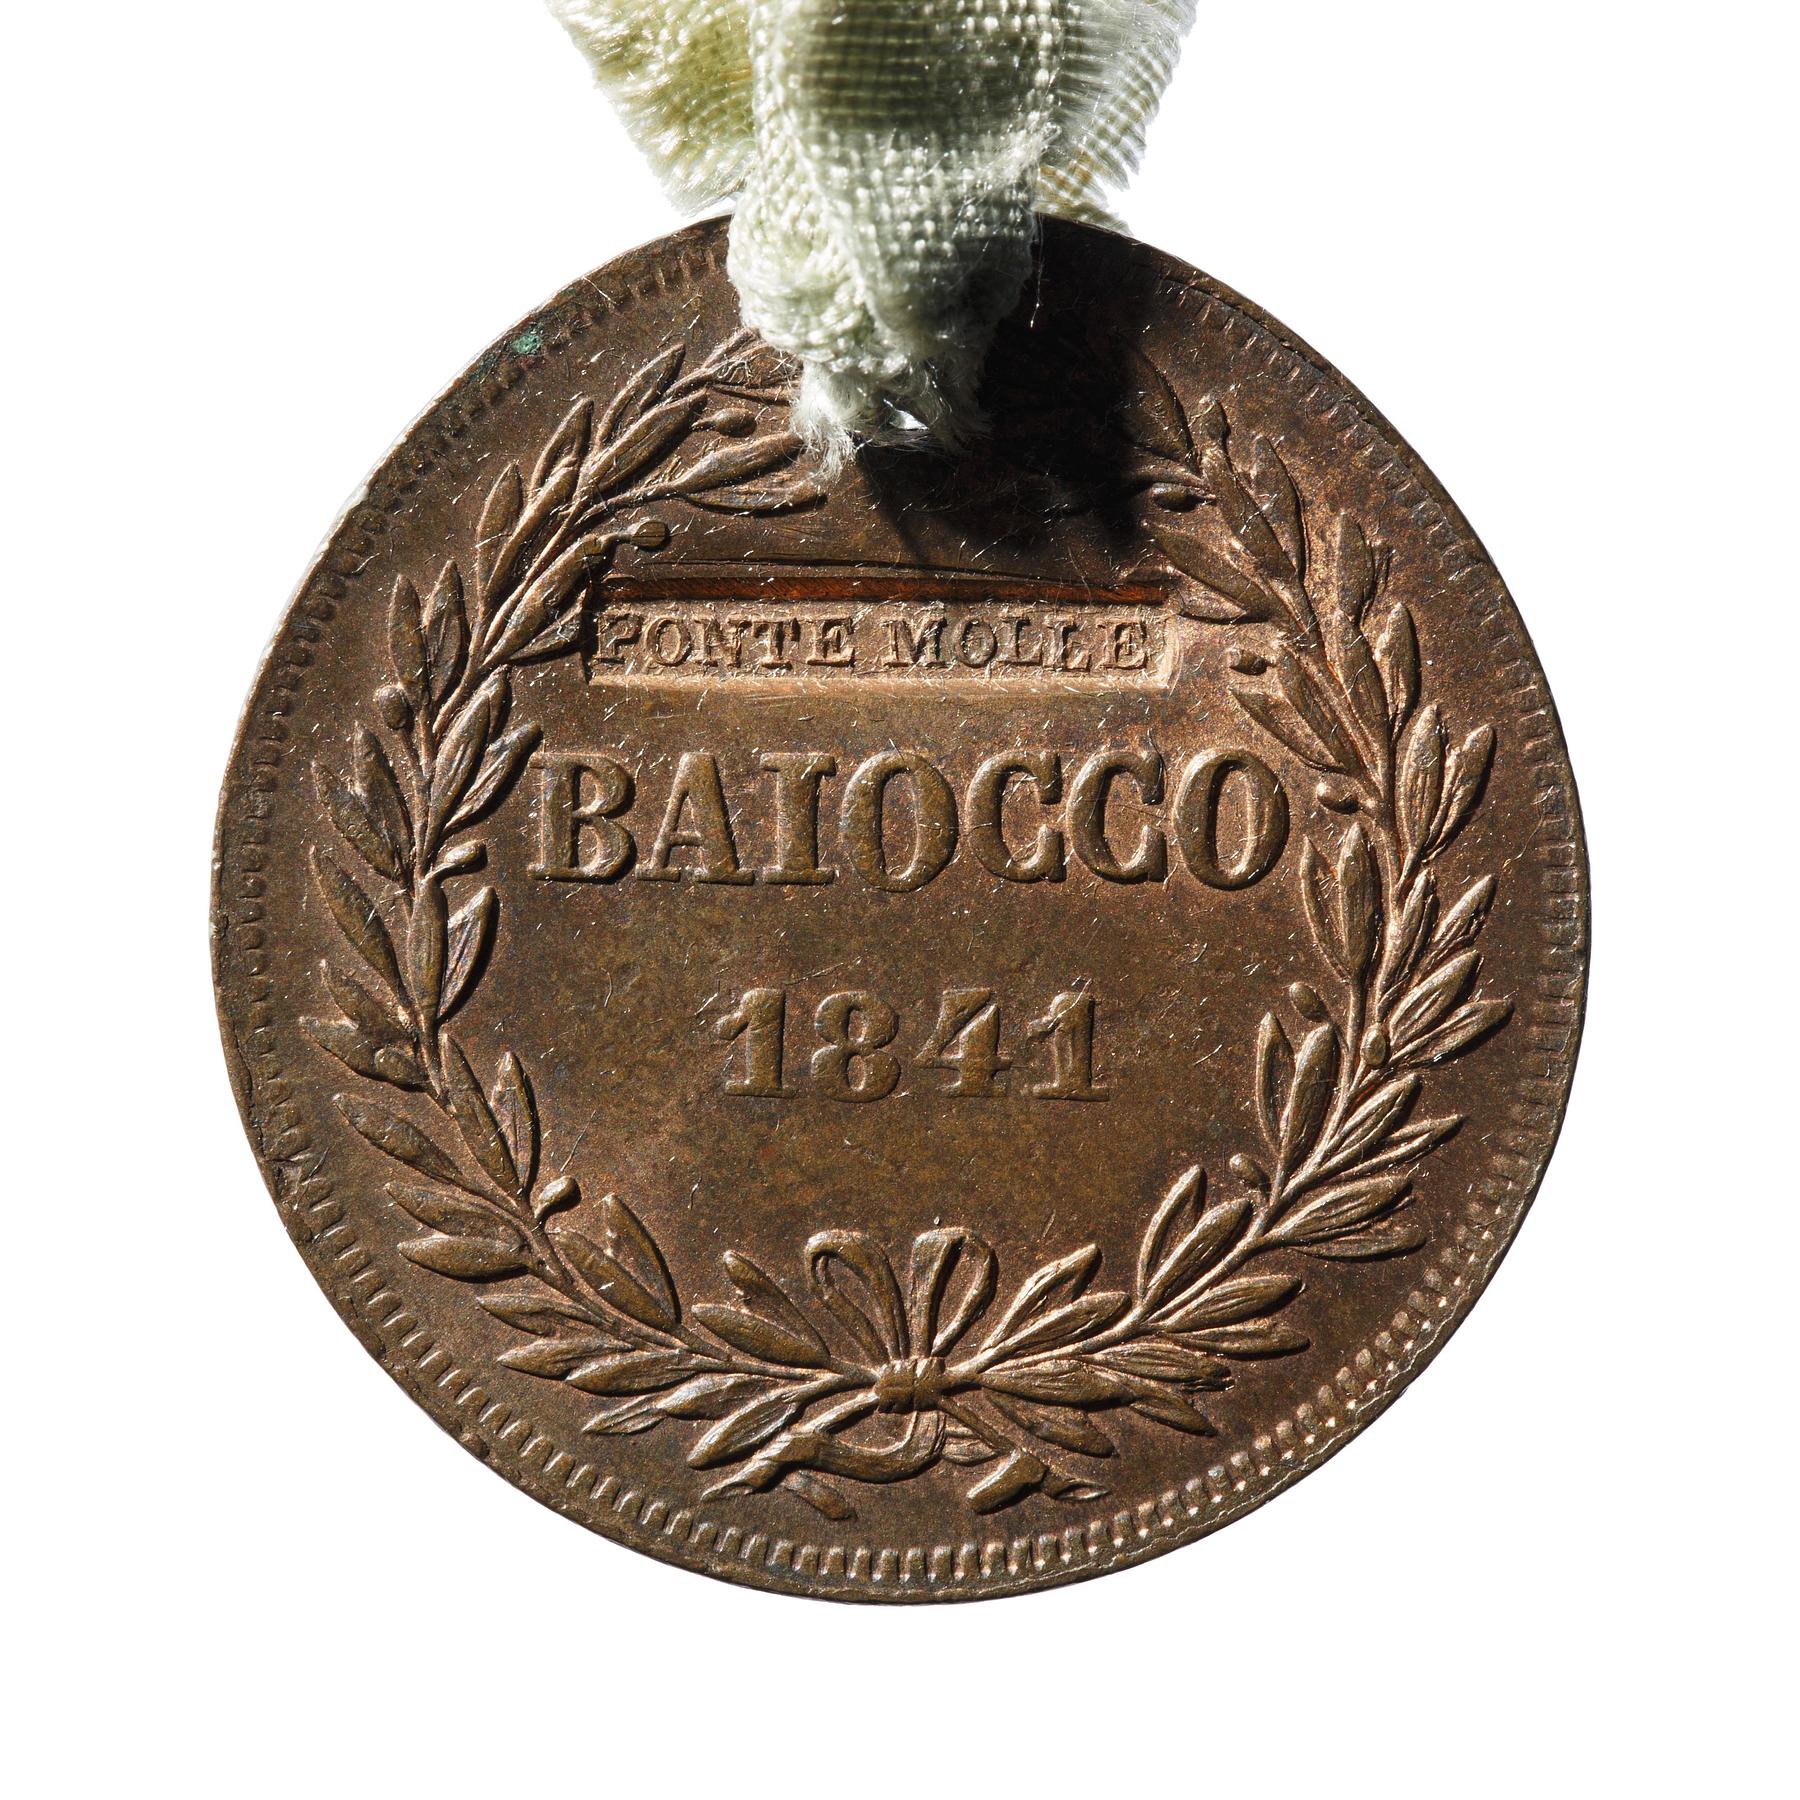 The Baiocco Order of the Ponte Molle Society, N91